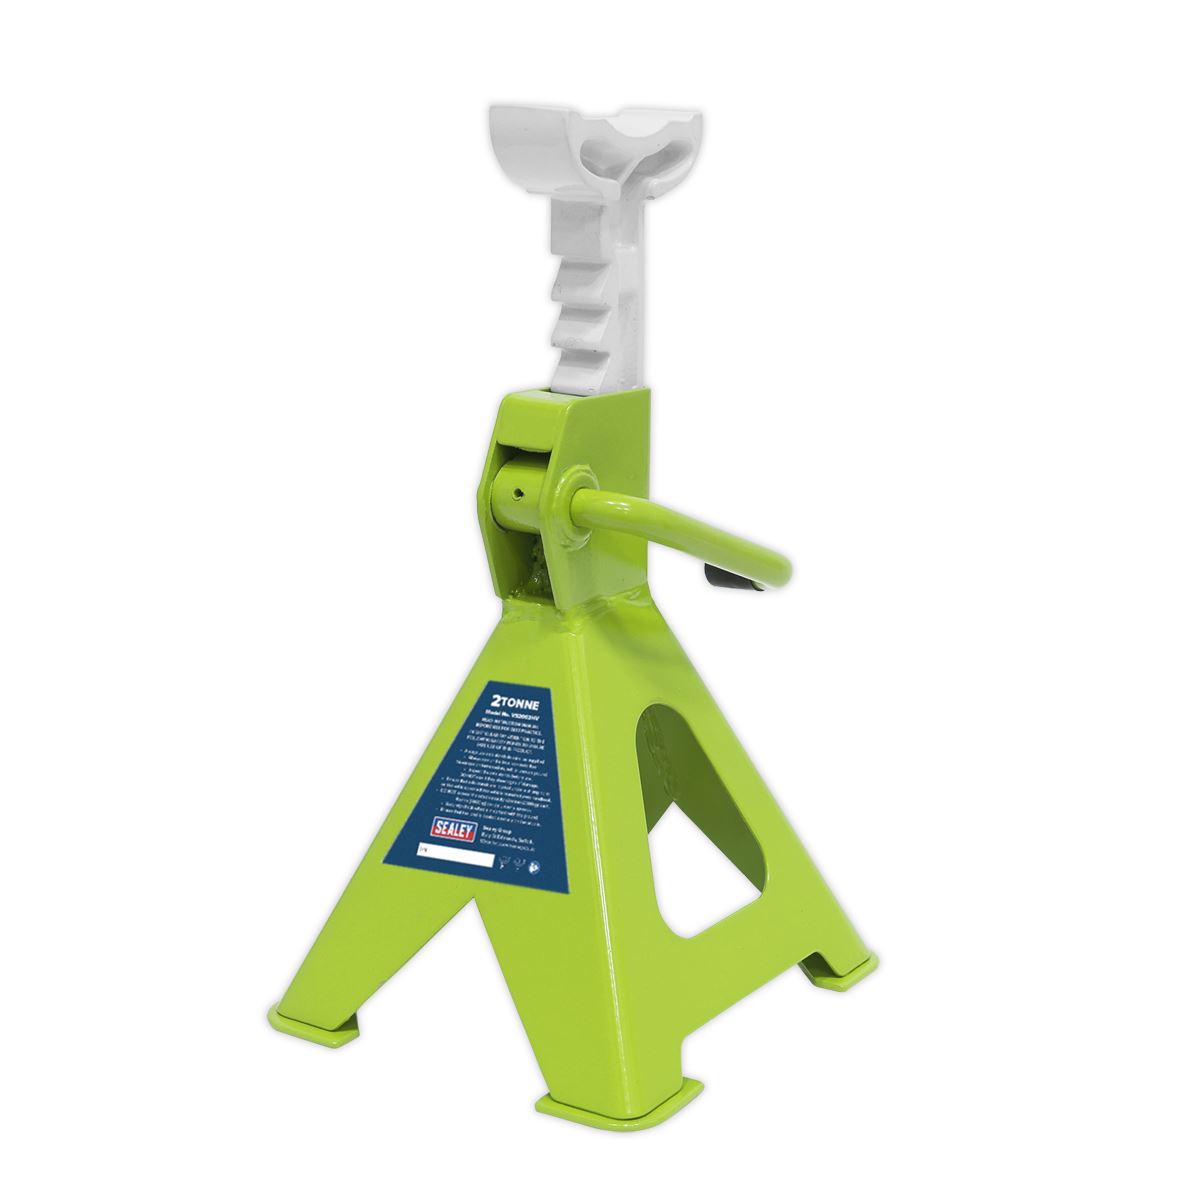 Sealey Ratchet Type Axle Stands (Pair) 2 Tonne Capacity per Stand - Hi-Vis Green